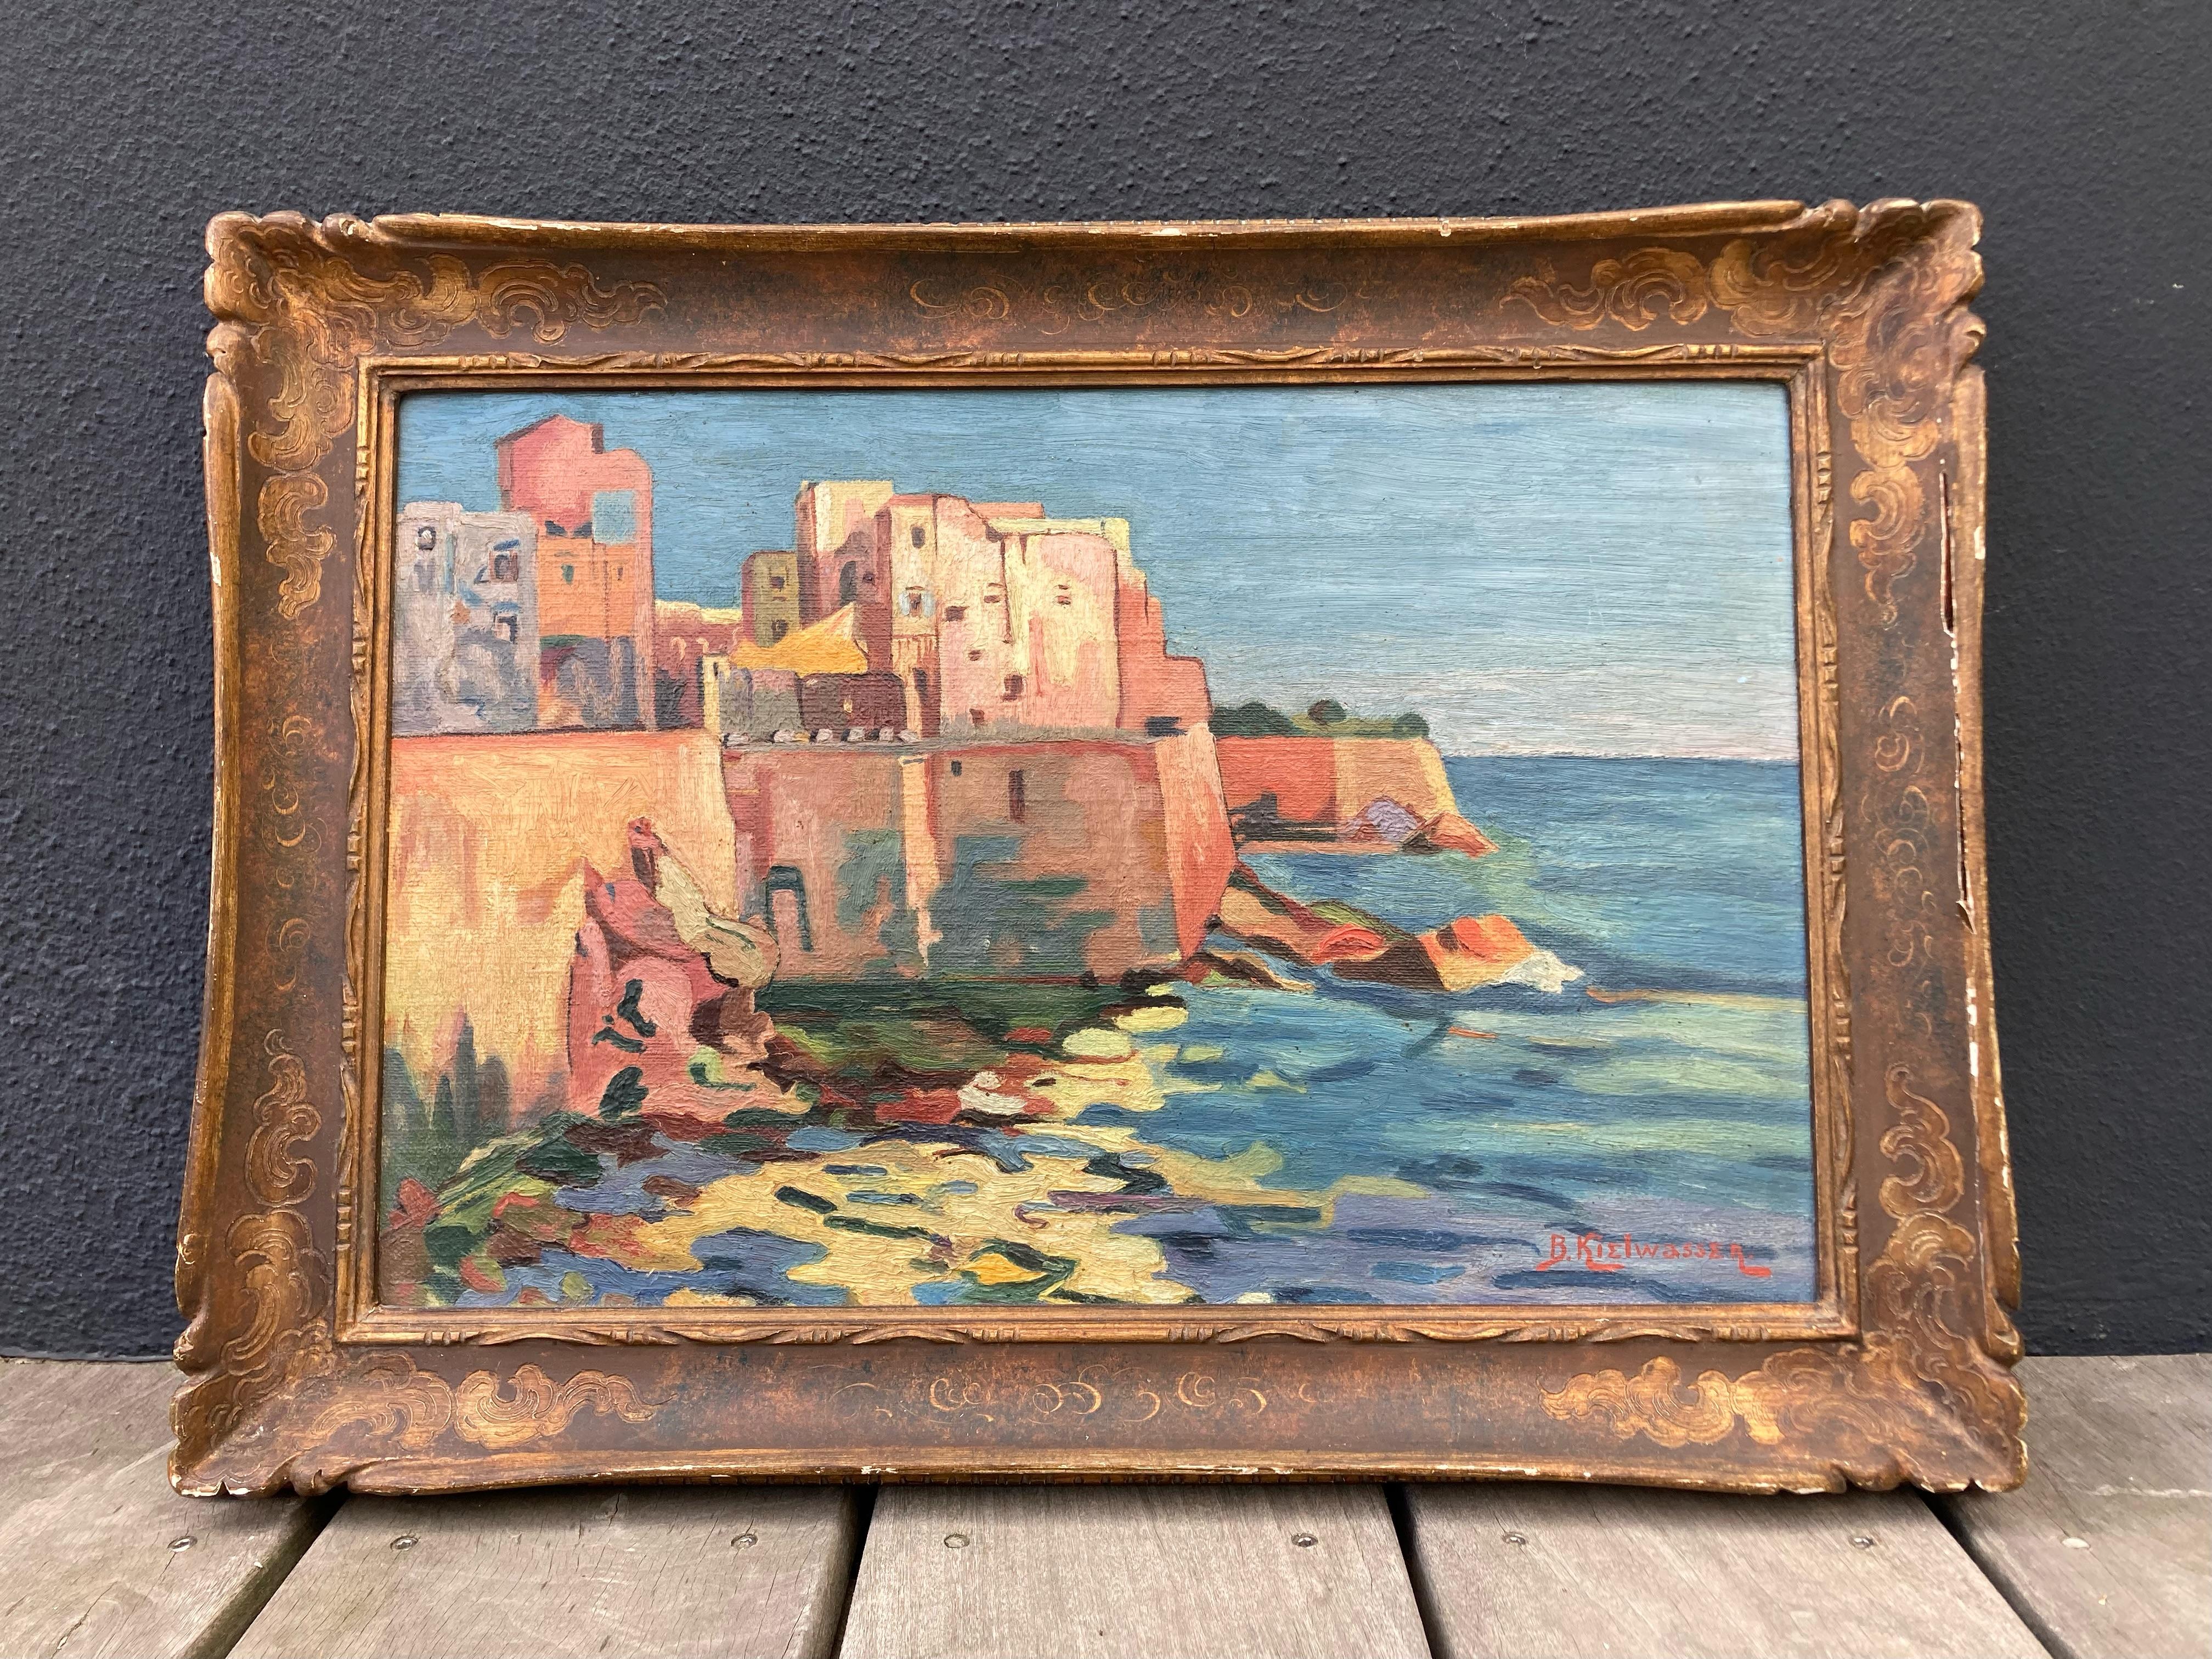 A very colorful, early 20th century original oil painting on canvas board. Sourced in France, this modernist artwork is signed by the artist and colorist, B. Kielwasser, but not dated. The painting features the shoreline of a fortified town in the